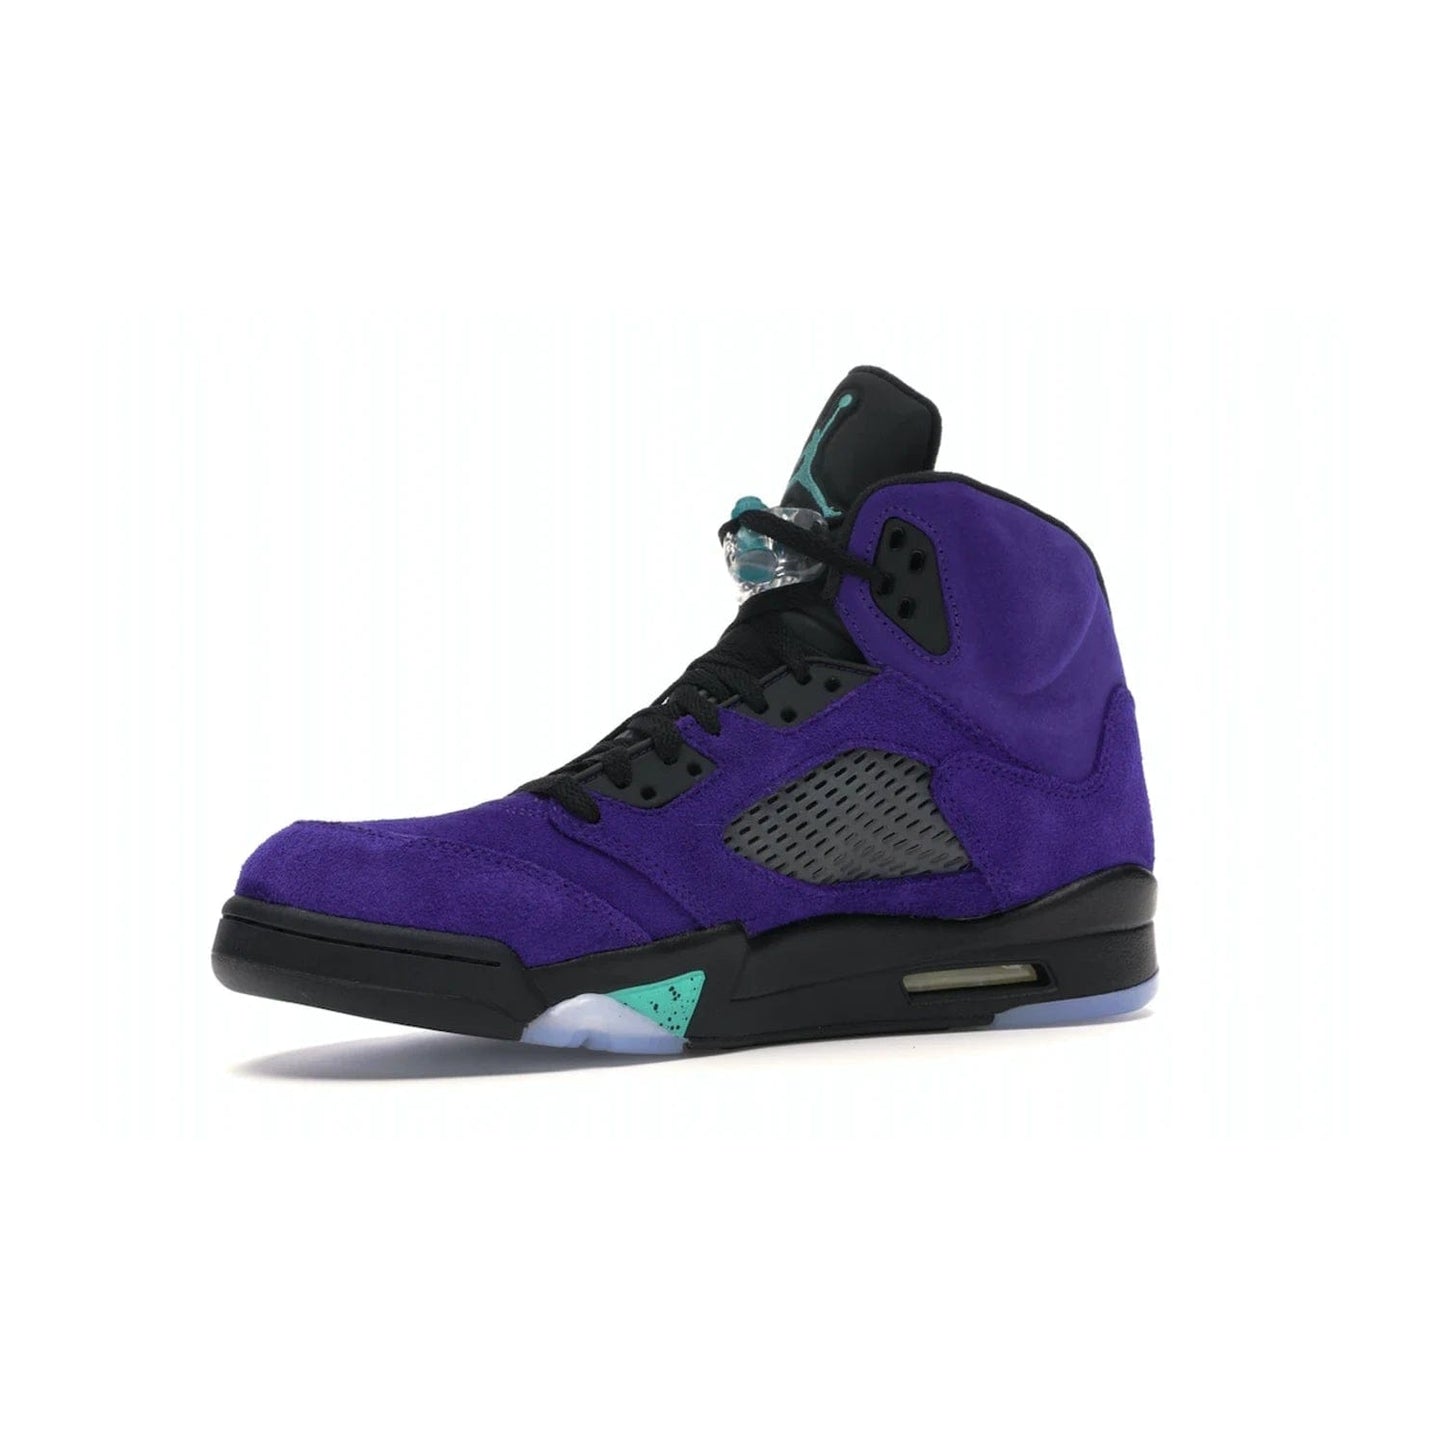 Jordan 5 Retro Alternate Grape - Image 16 - Only at www.BallersClubKickz.com - Bring the classic Jordan 5 Retro Alternate Grape to your sneaker collection! Featuring a purple suede upper, charcoal underlays, green detailing, and an icy and green outsole. Releasing for the first time since 1990, don't miss this chance to add a piece of sneaker history to your collection.